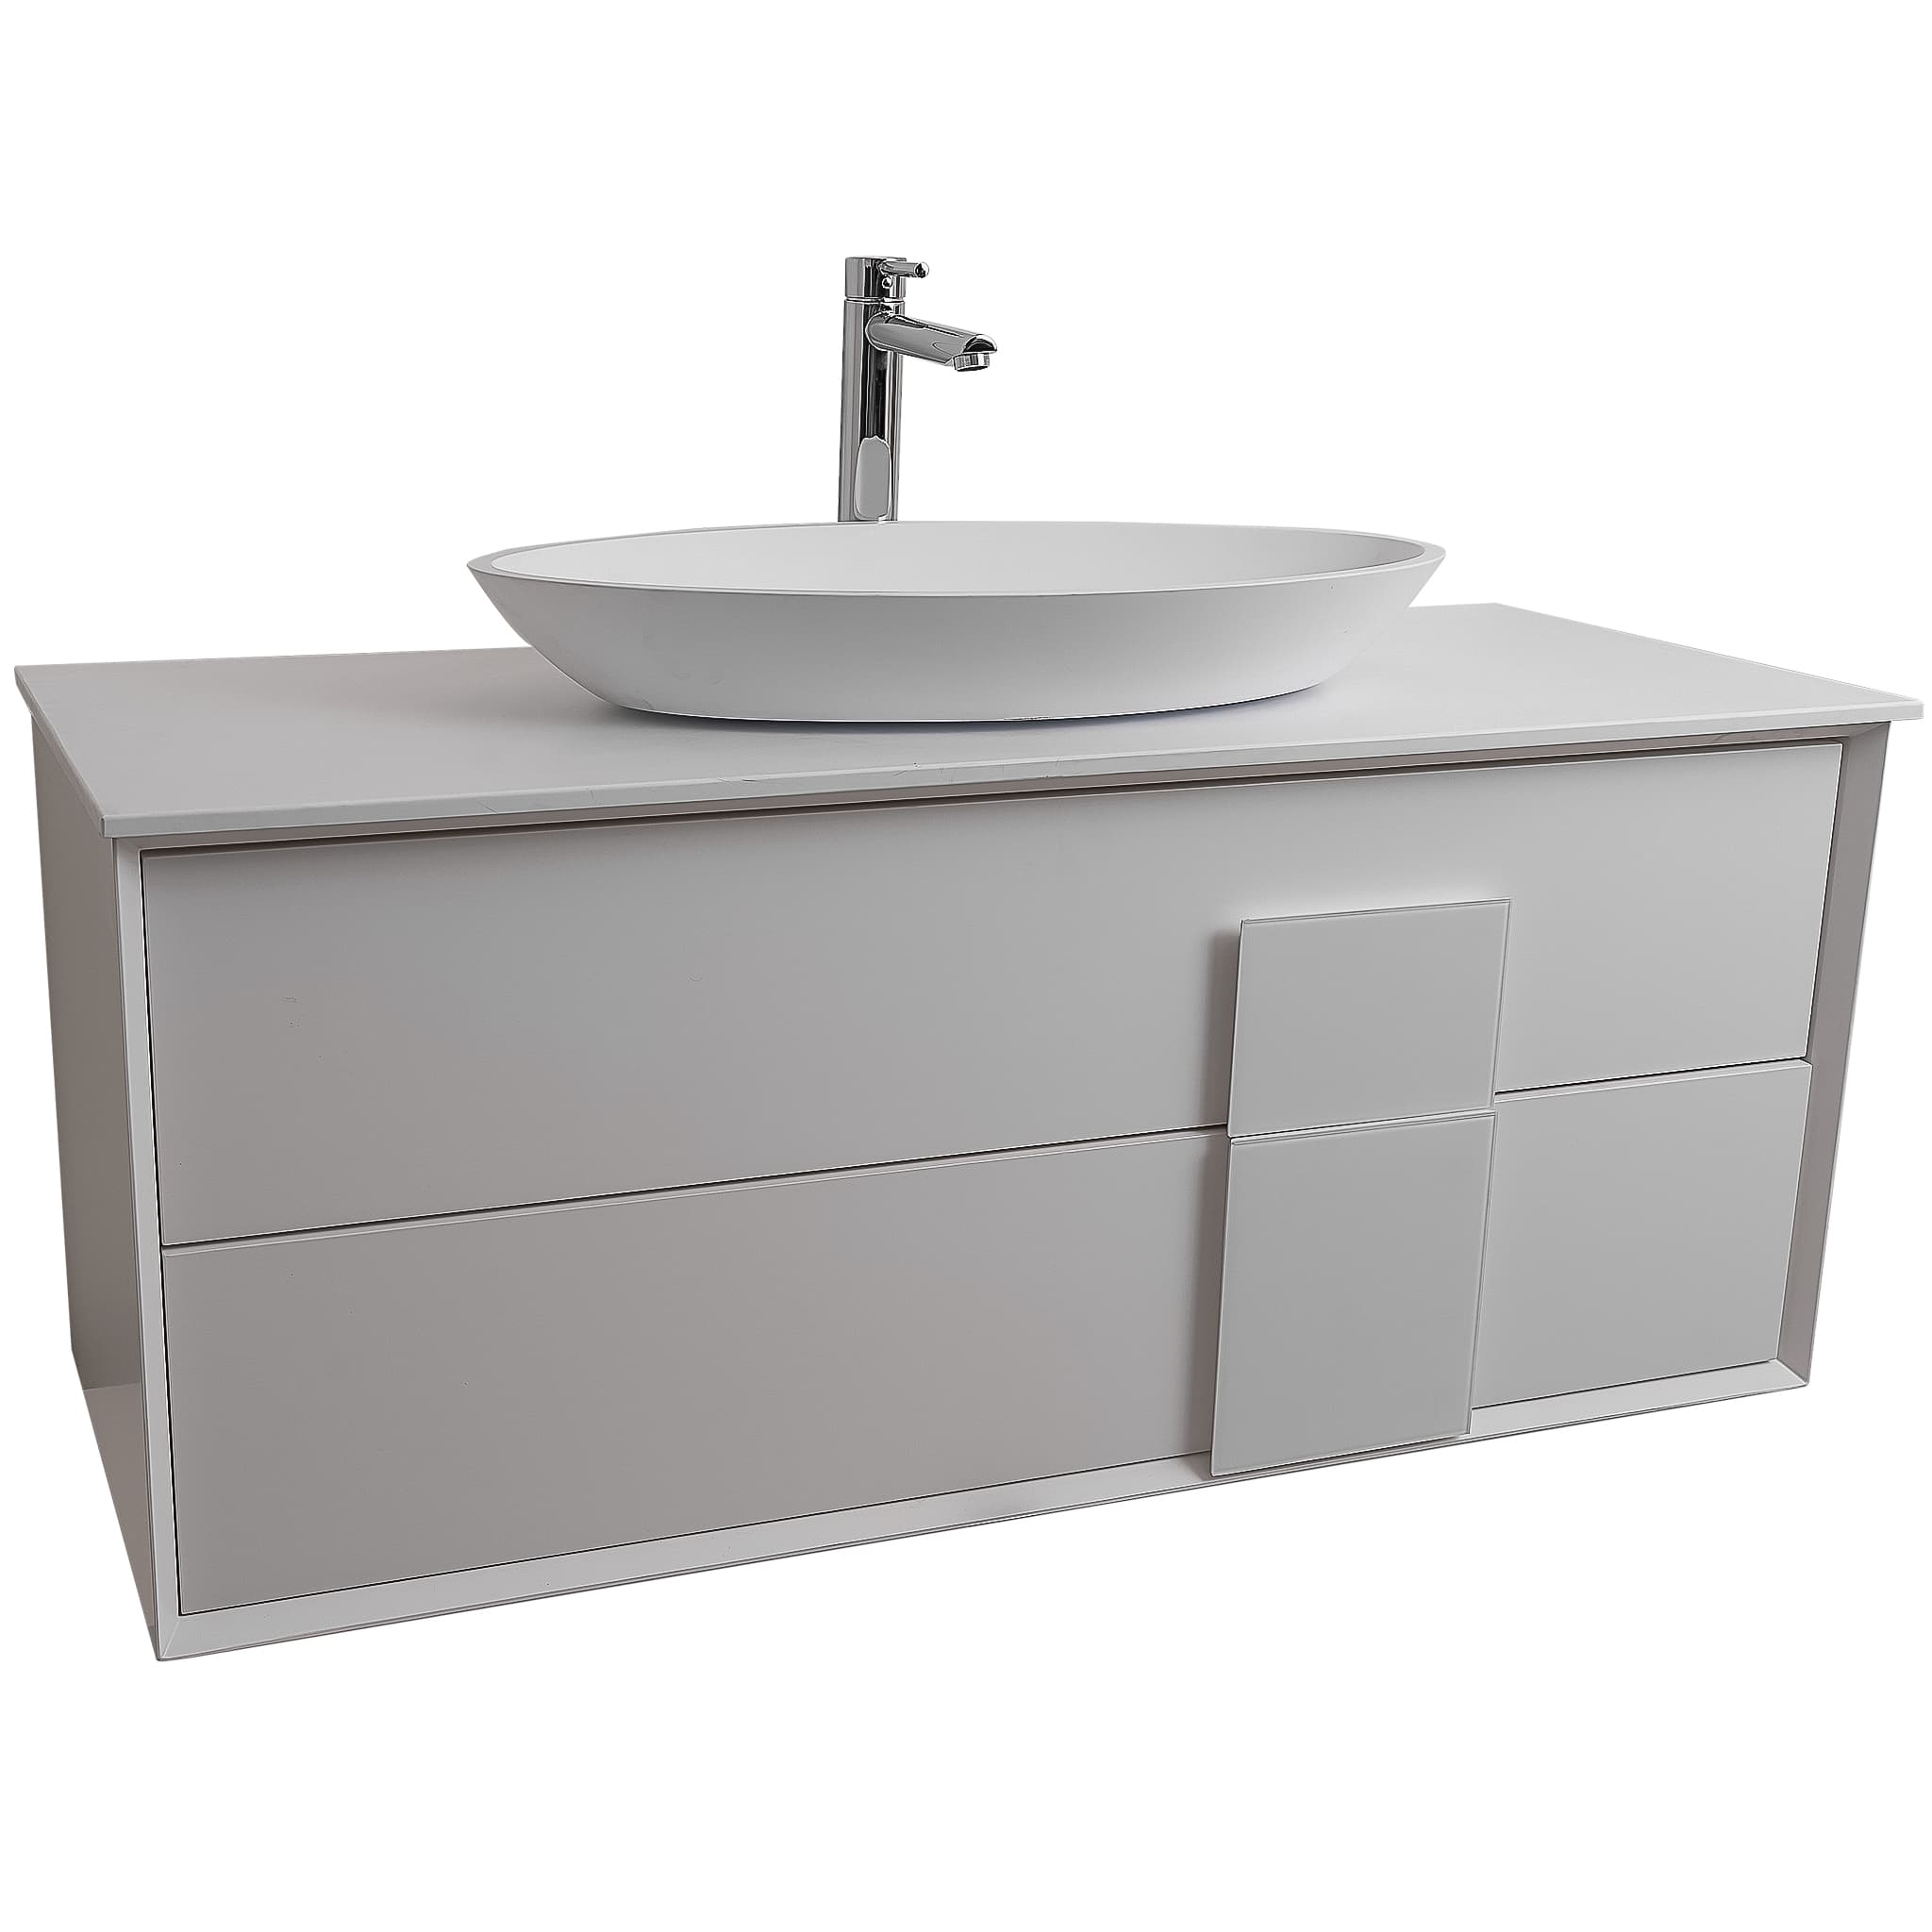 Piazza 47.5 Matte White With White Handle Cabinet, Solid Surface Flat White Counter and Oval Solid Surface White Basin 1305, Wall Mounted Modern Vanity Set